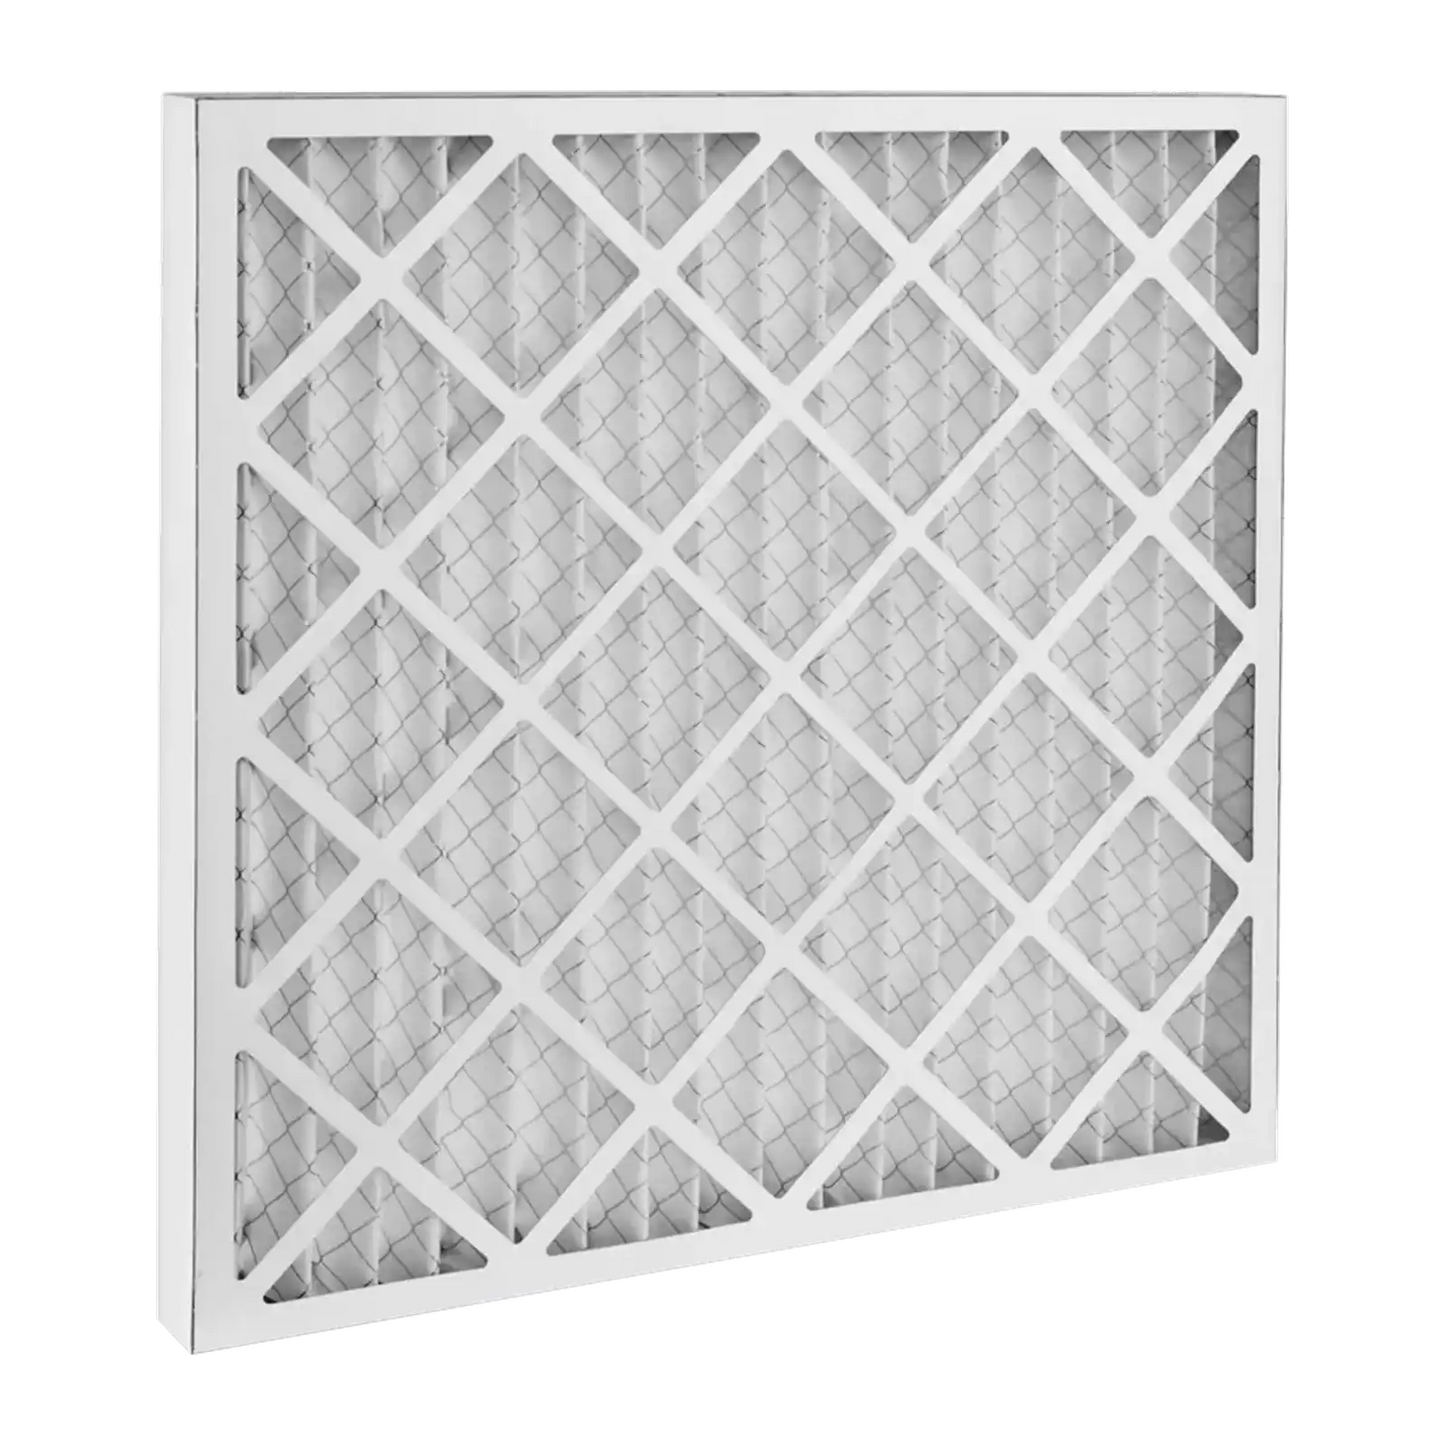 Dafco 24x24x1 Furnace AC Filter - Case of 12